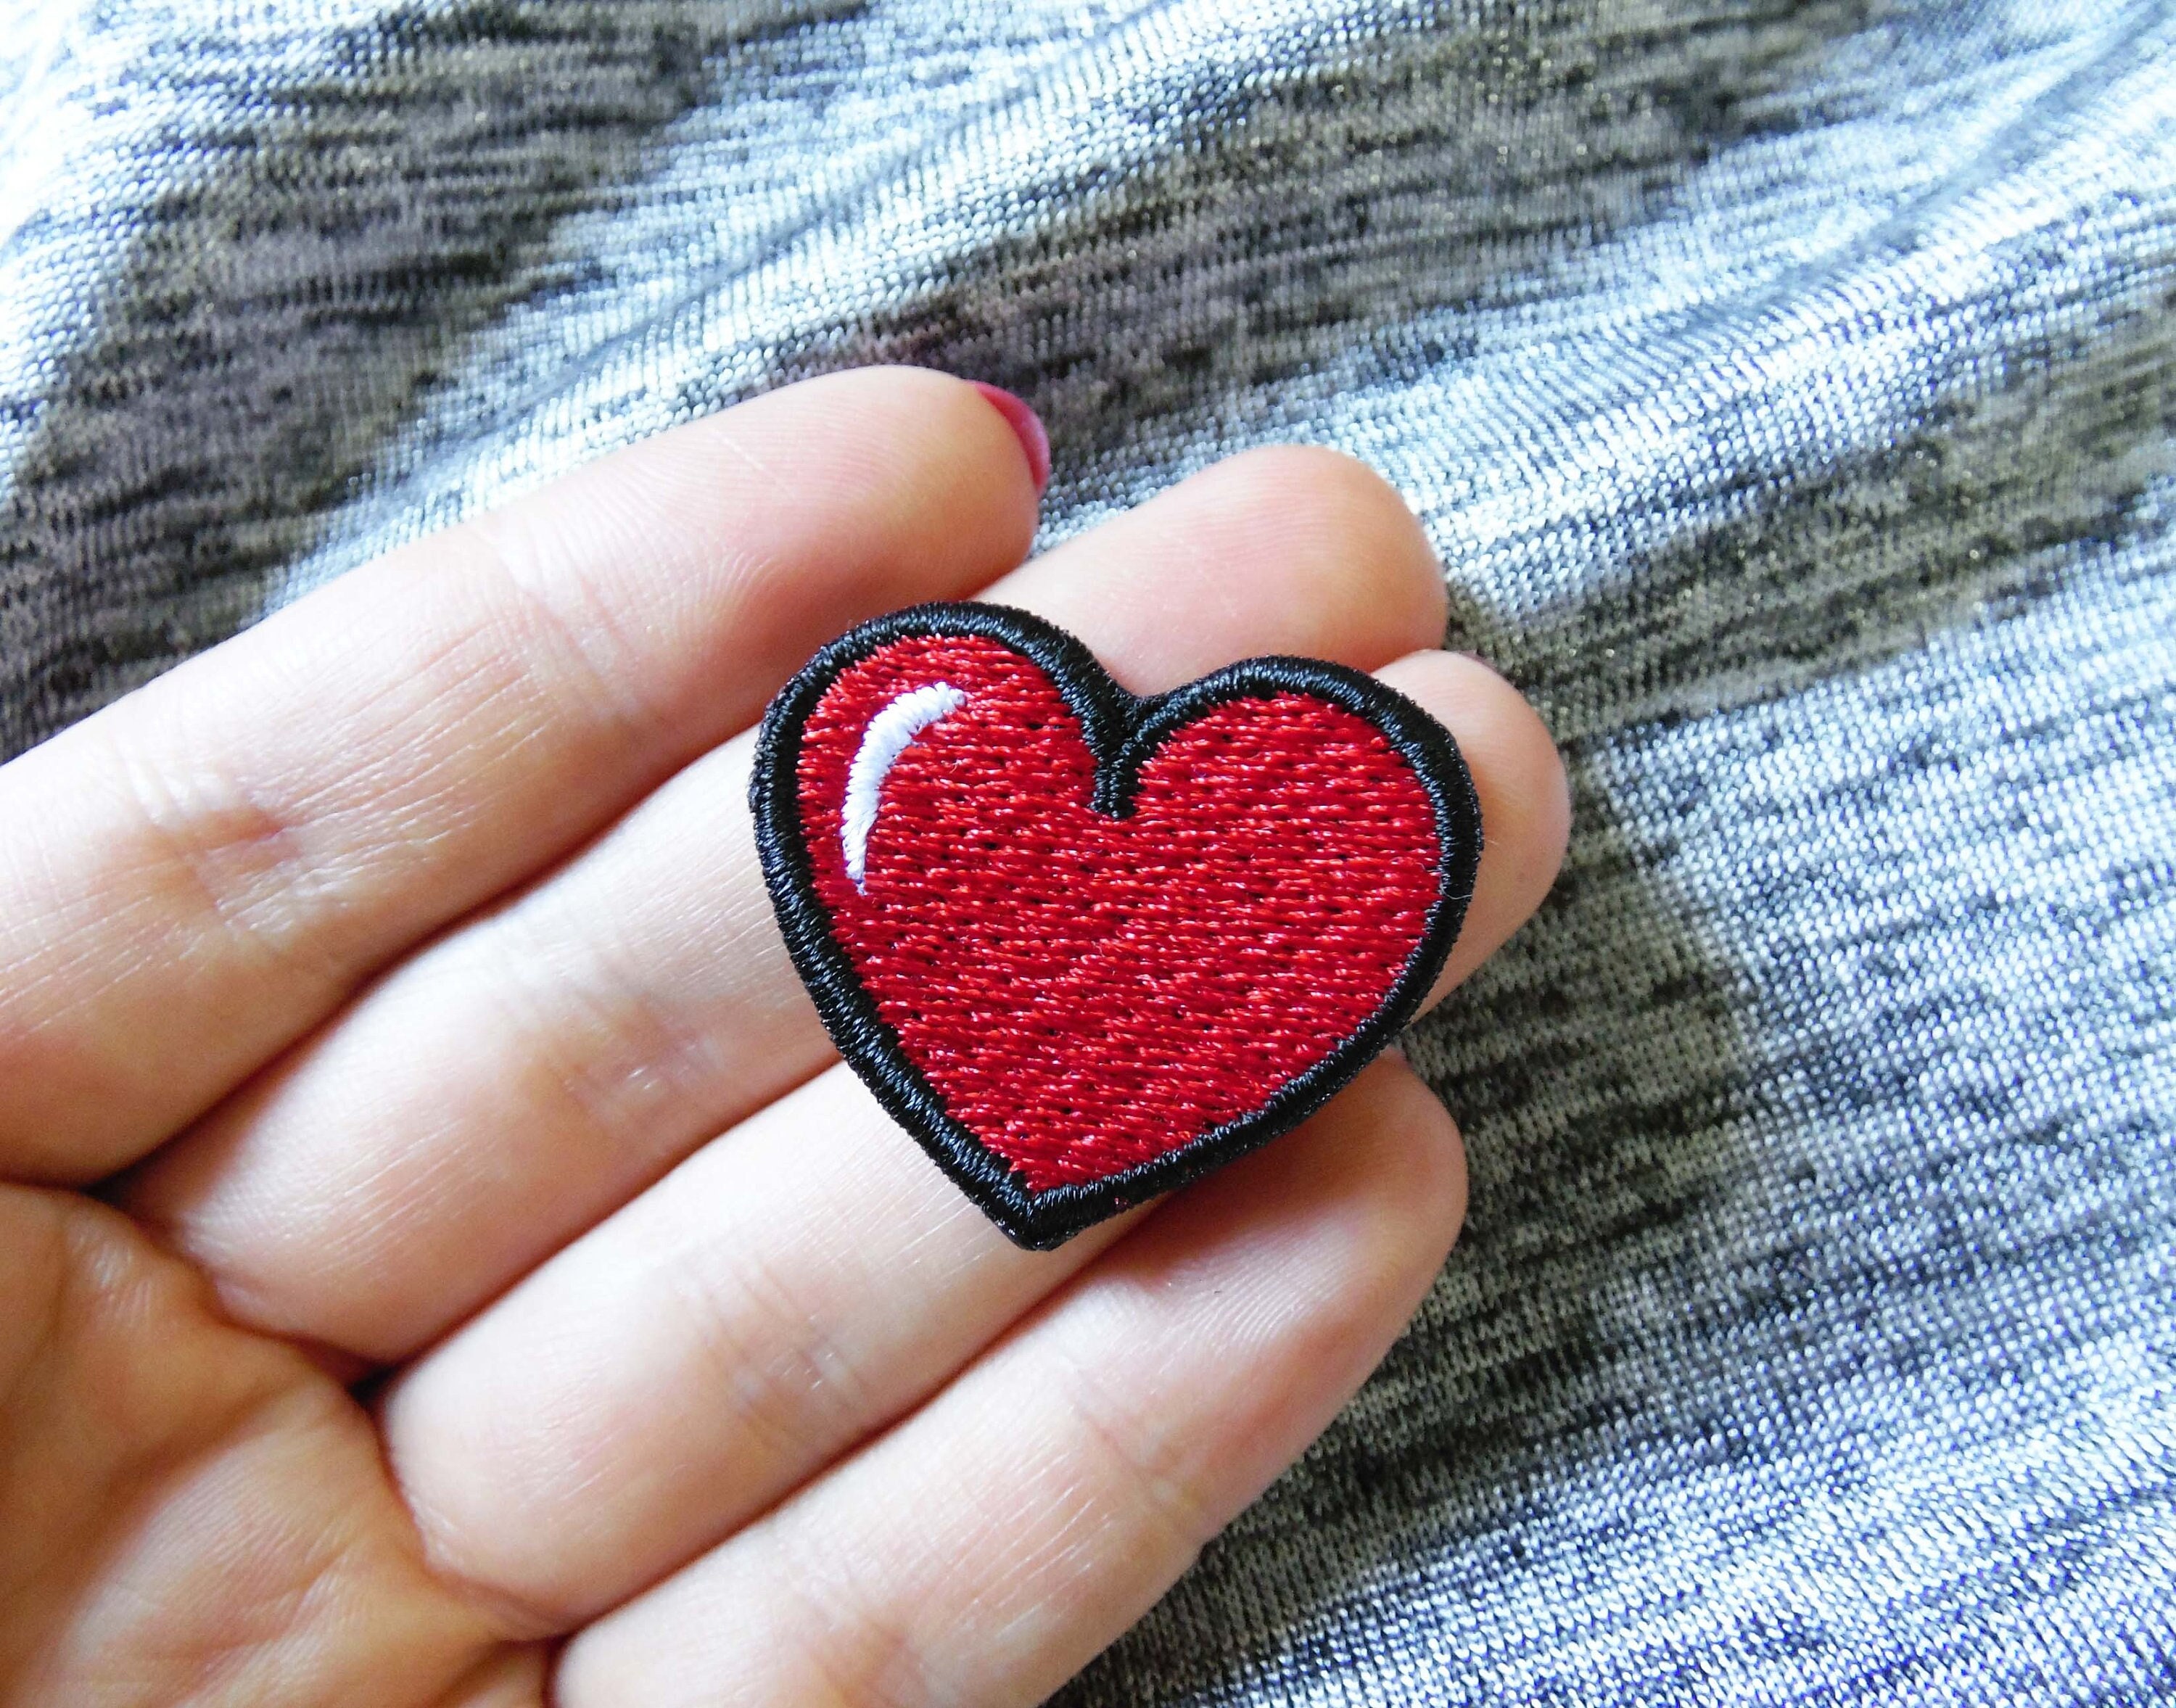 Red Heart Iron on Embroidered Patches: NICEVINYL 40pcs Heart Iron on  Patches for Clothing Repair Small Sew on Cute Embroidery Applique Patch for